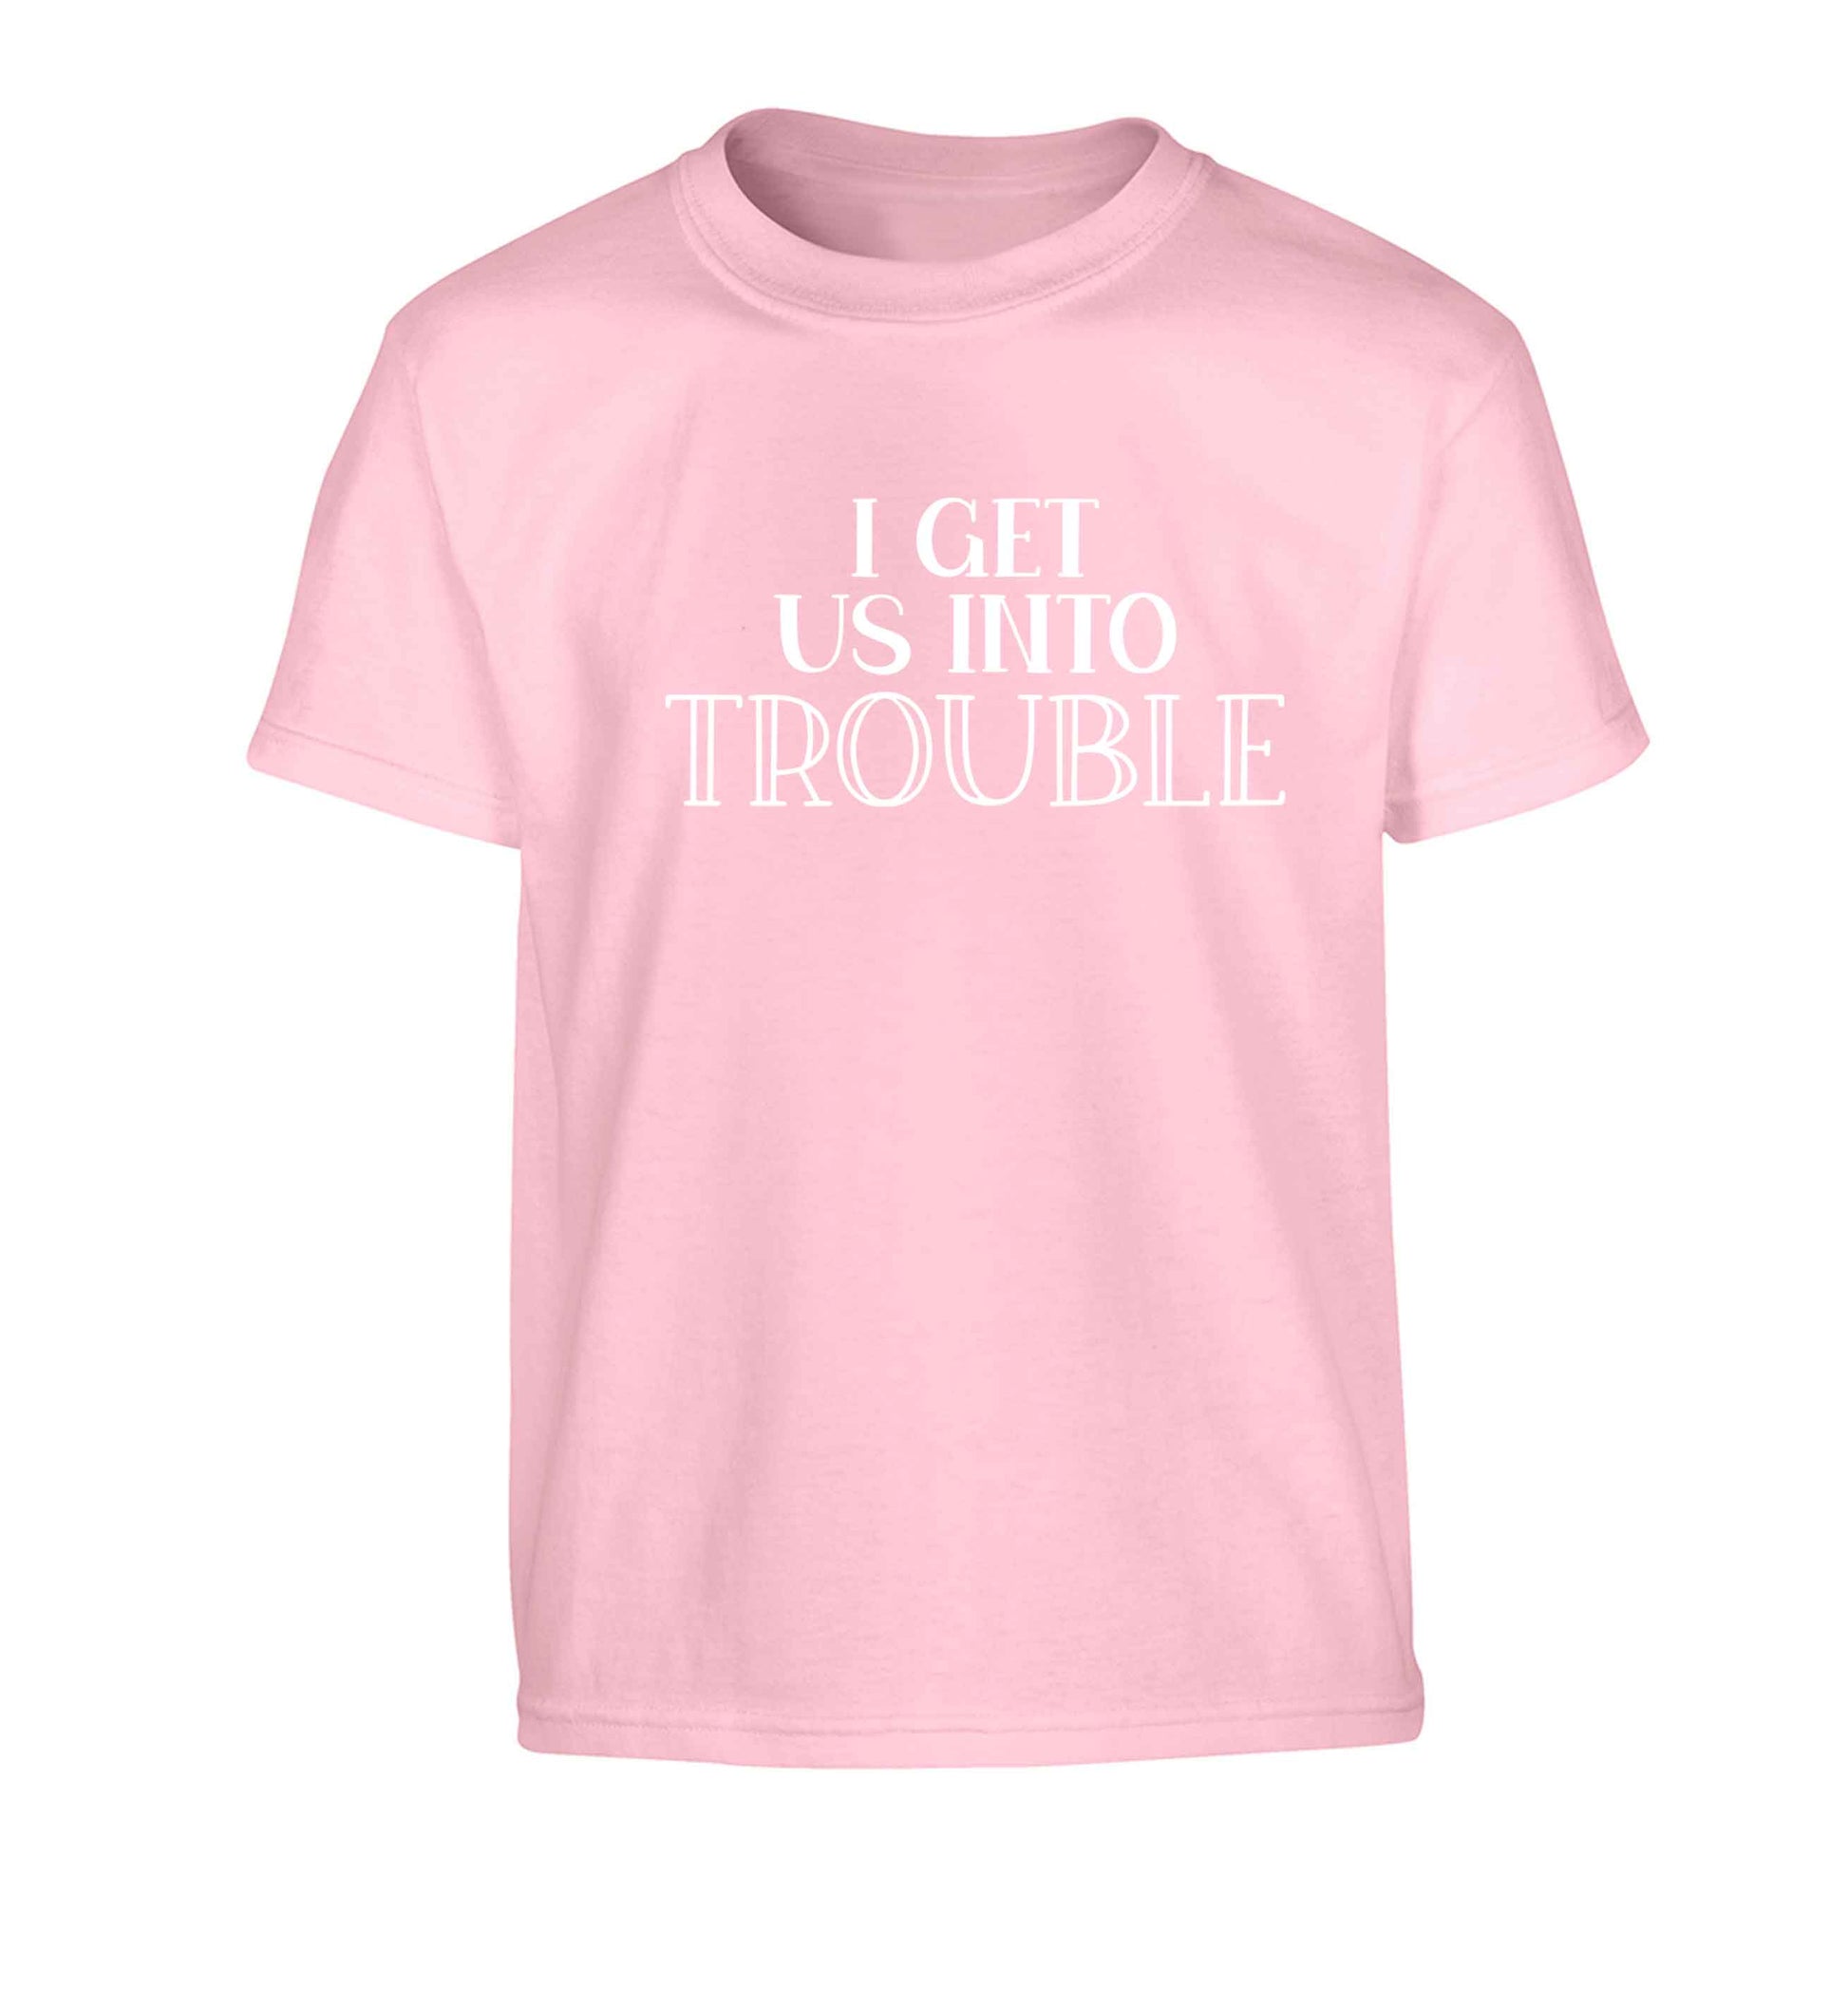 I get us into trouble Children's light pink Tshirt 12-13 Years